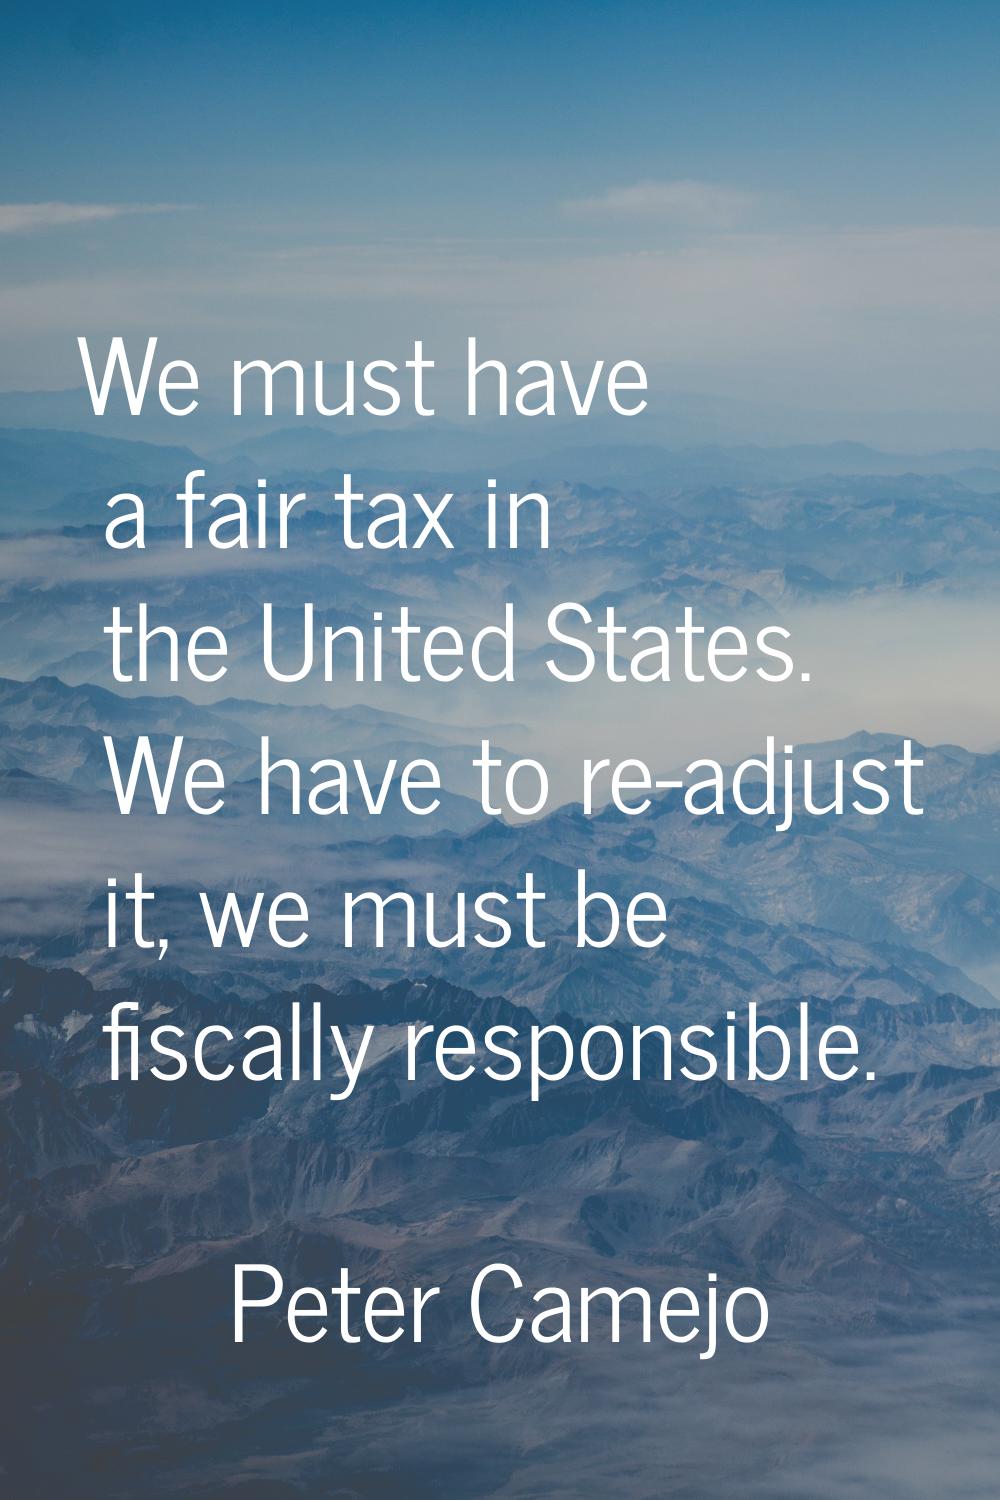 We must have a fair tax in the United States. We have to re-adjust it, we must be fiscally responsi